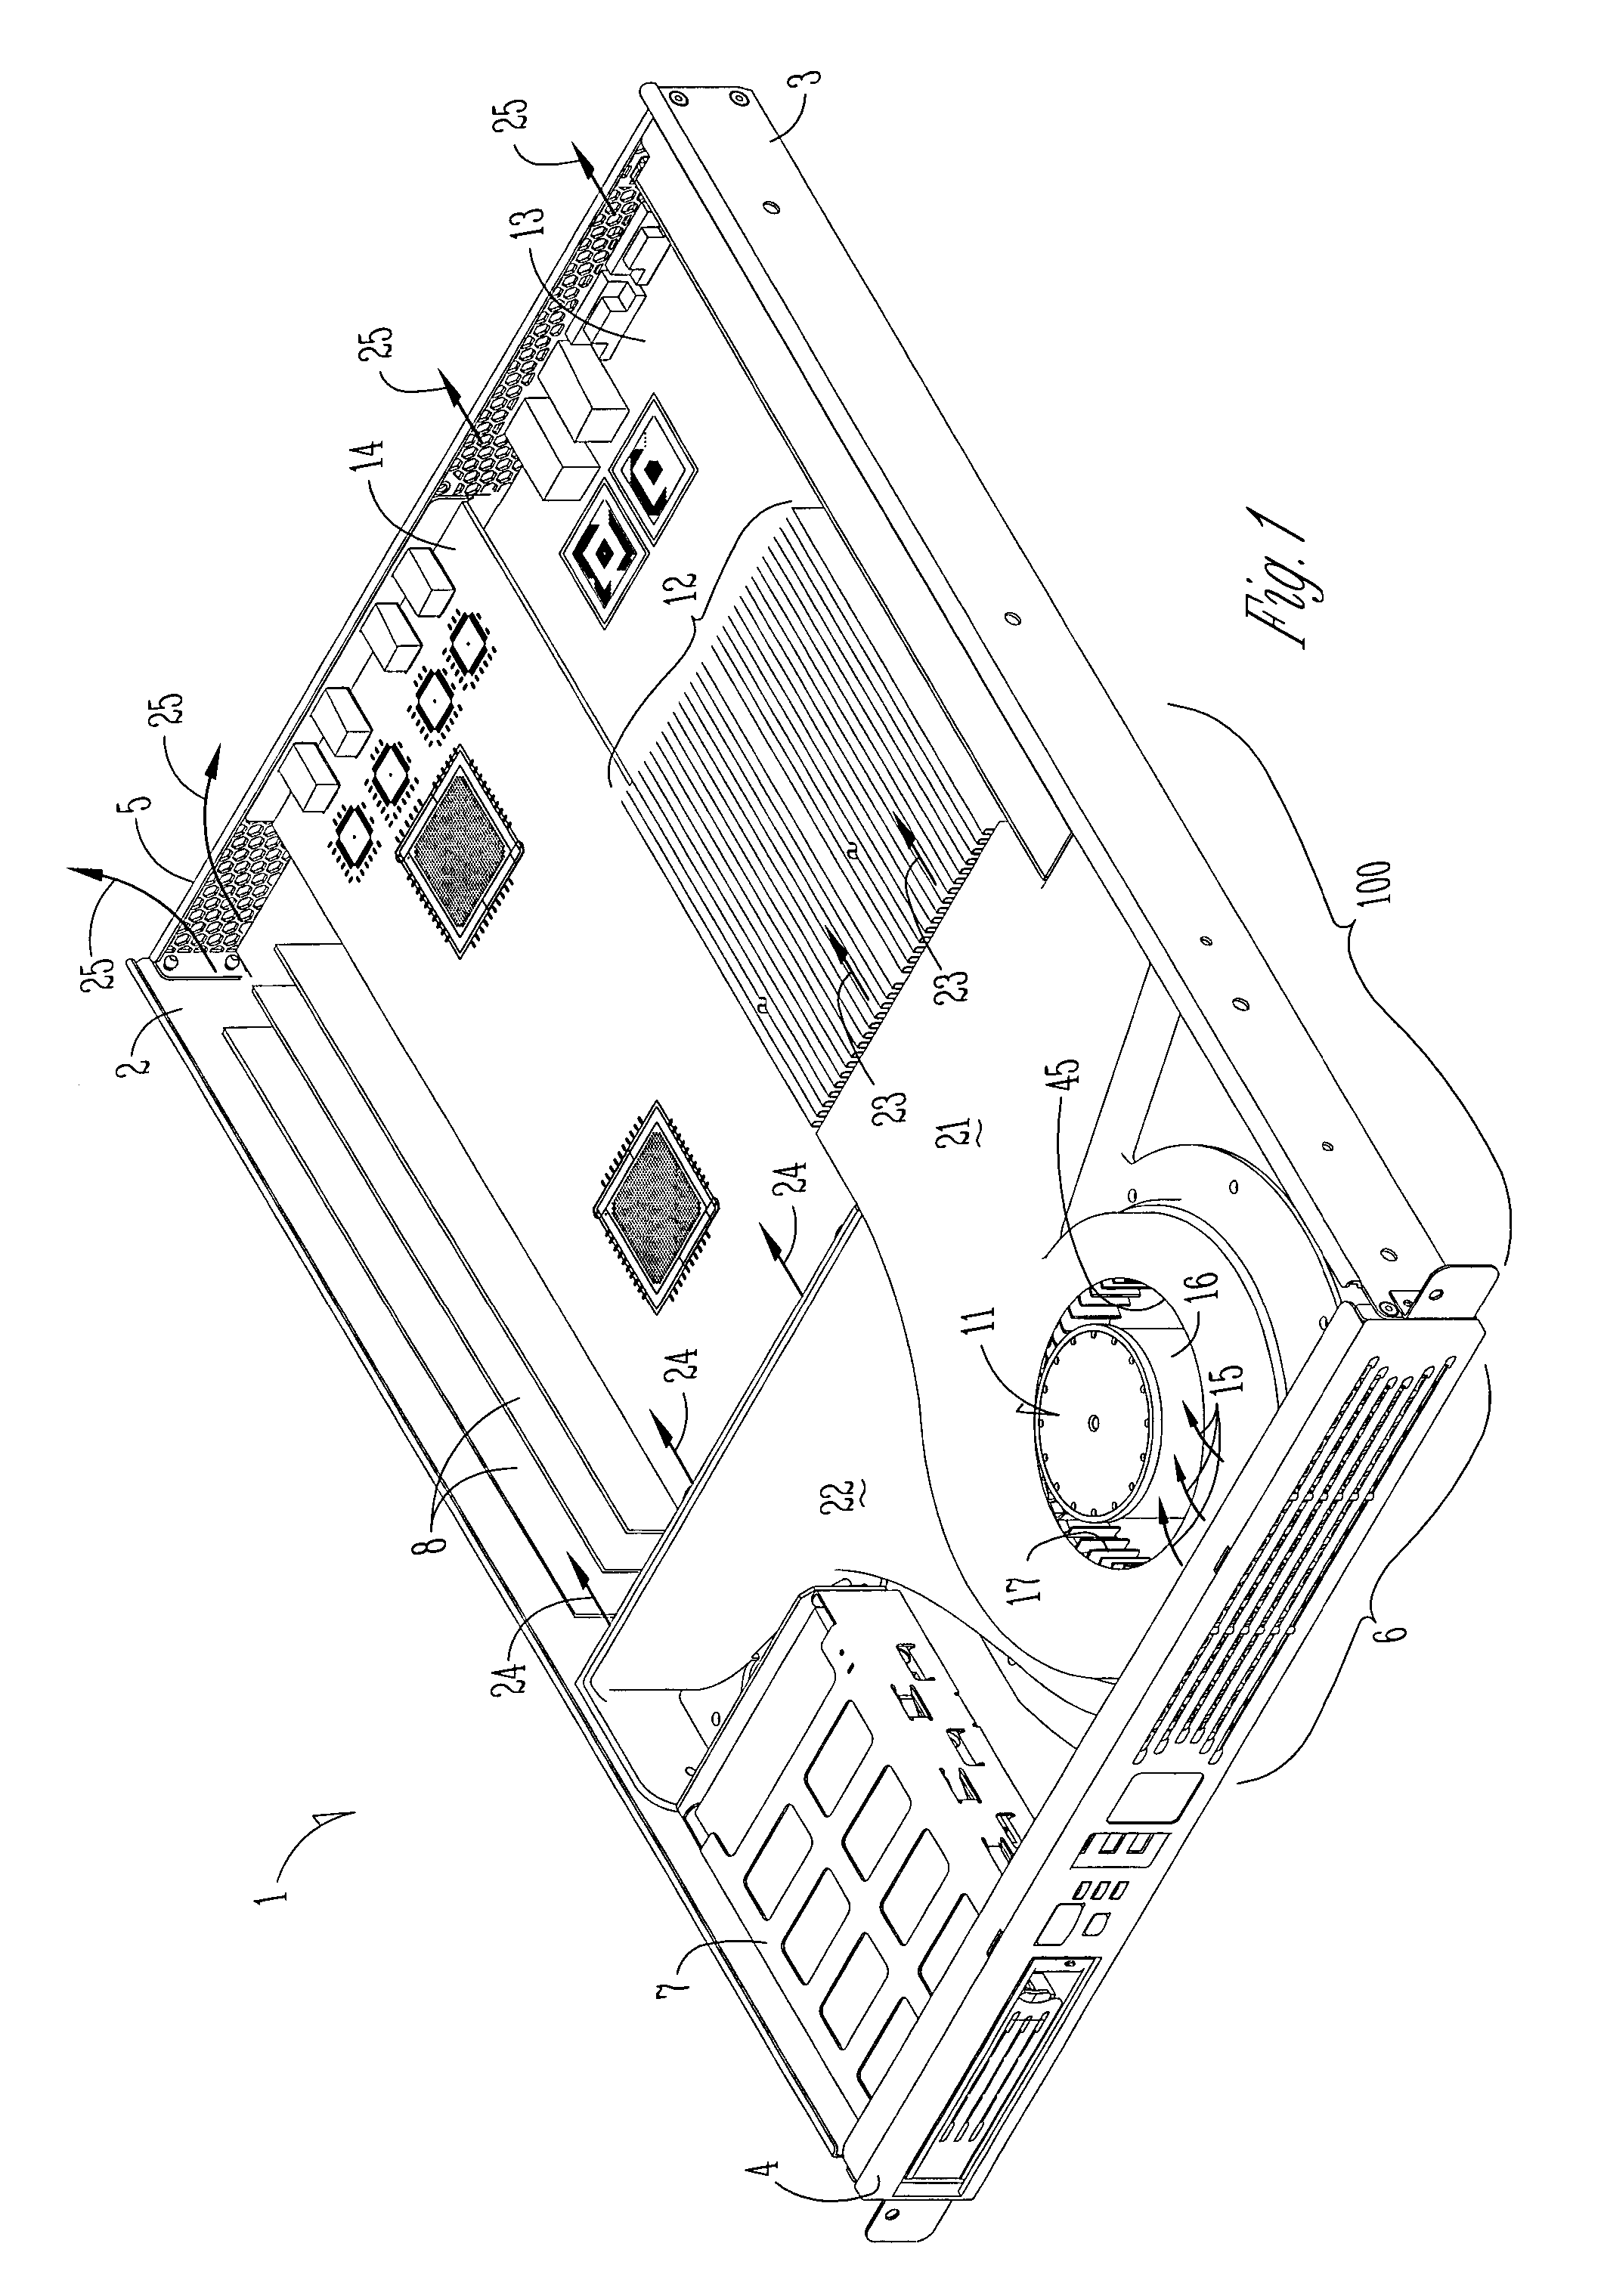 Baffles for high capacity air-cooling systems for electronics apparatus